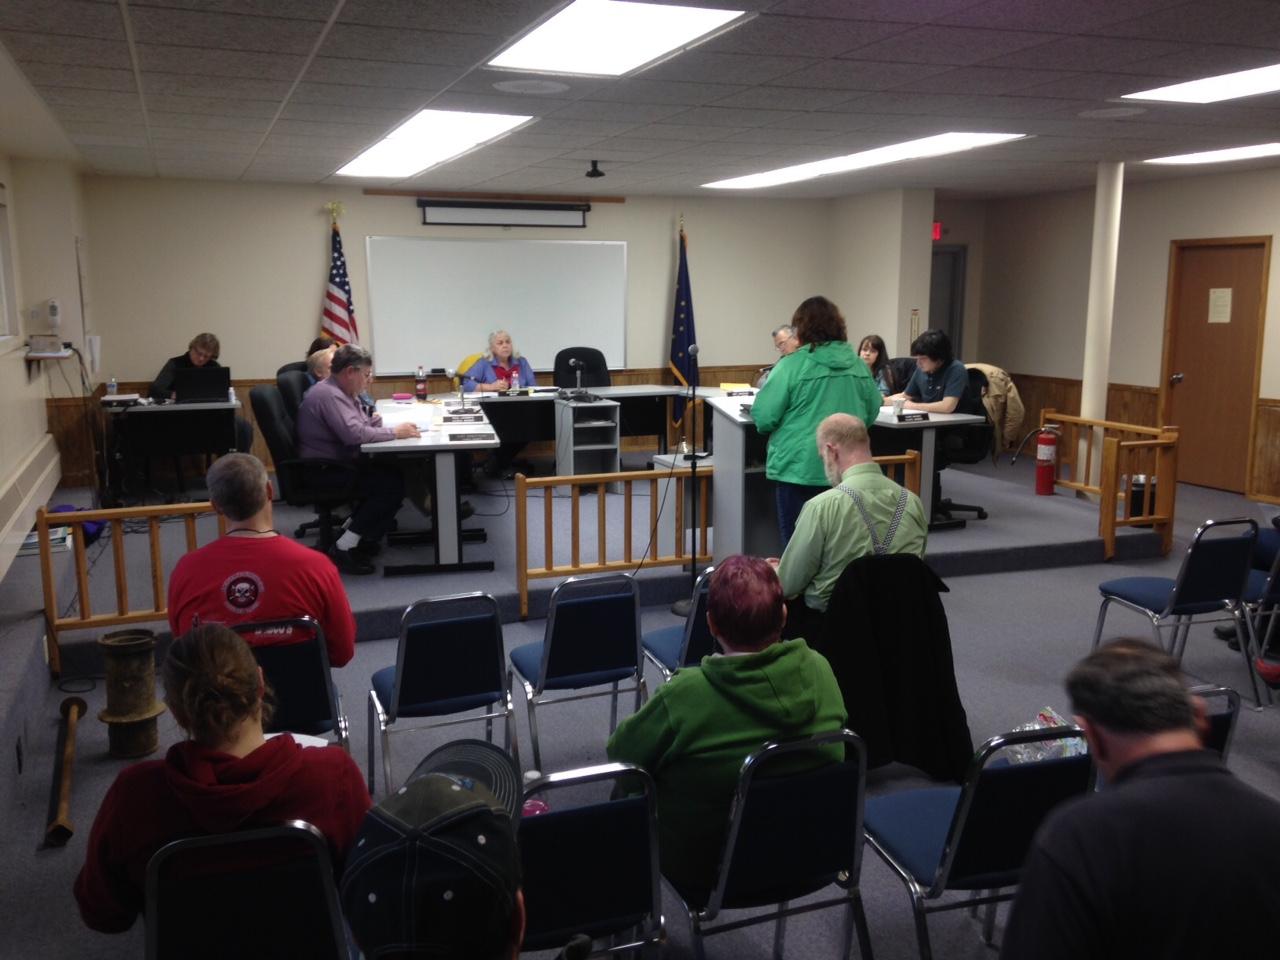 Kim Parker addressed the Dillingham city council Thursday night, asking them to lift a protest of a liquor license transfer and clear the way for a new package store on Raspberry Circle. (Photo by KDLG)